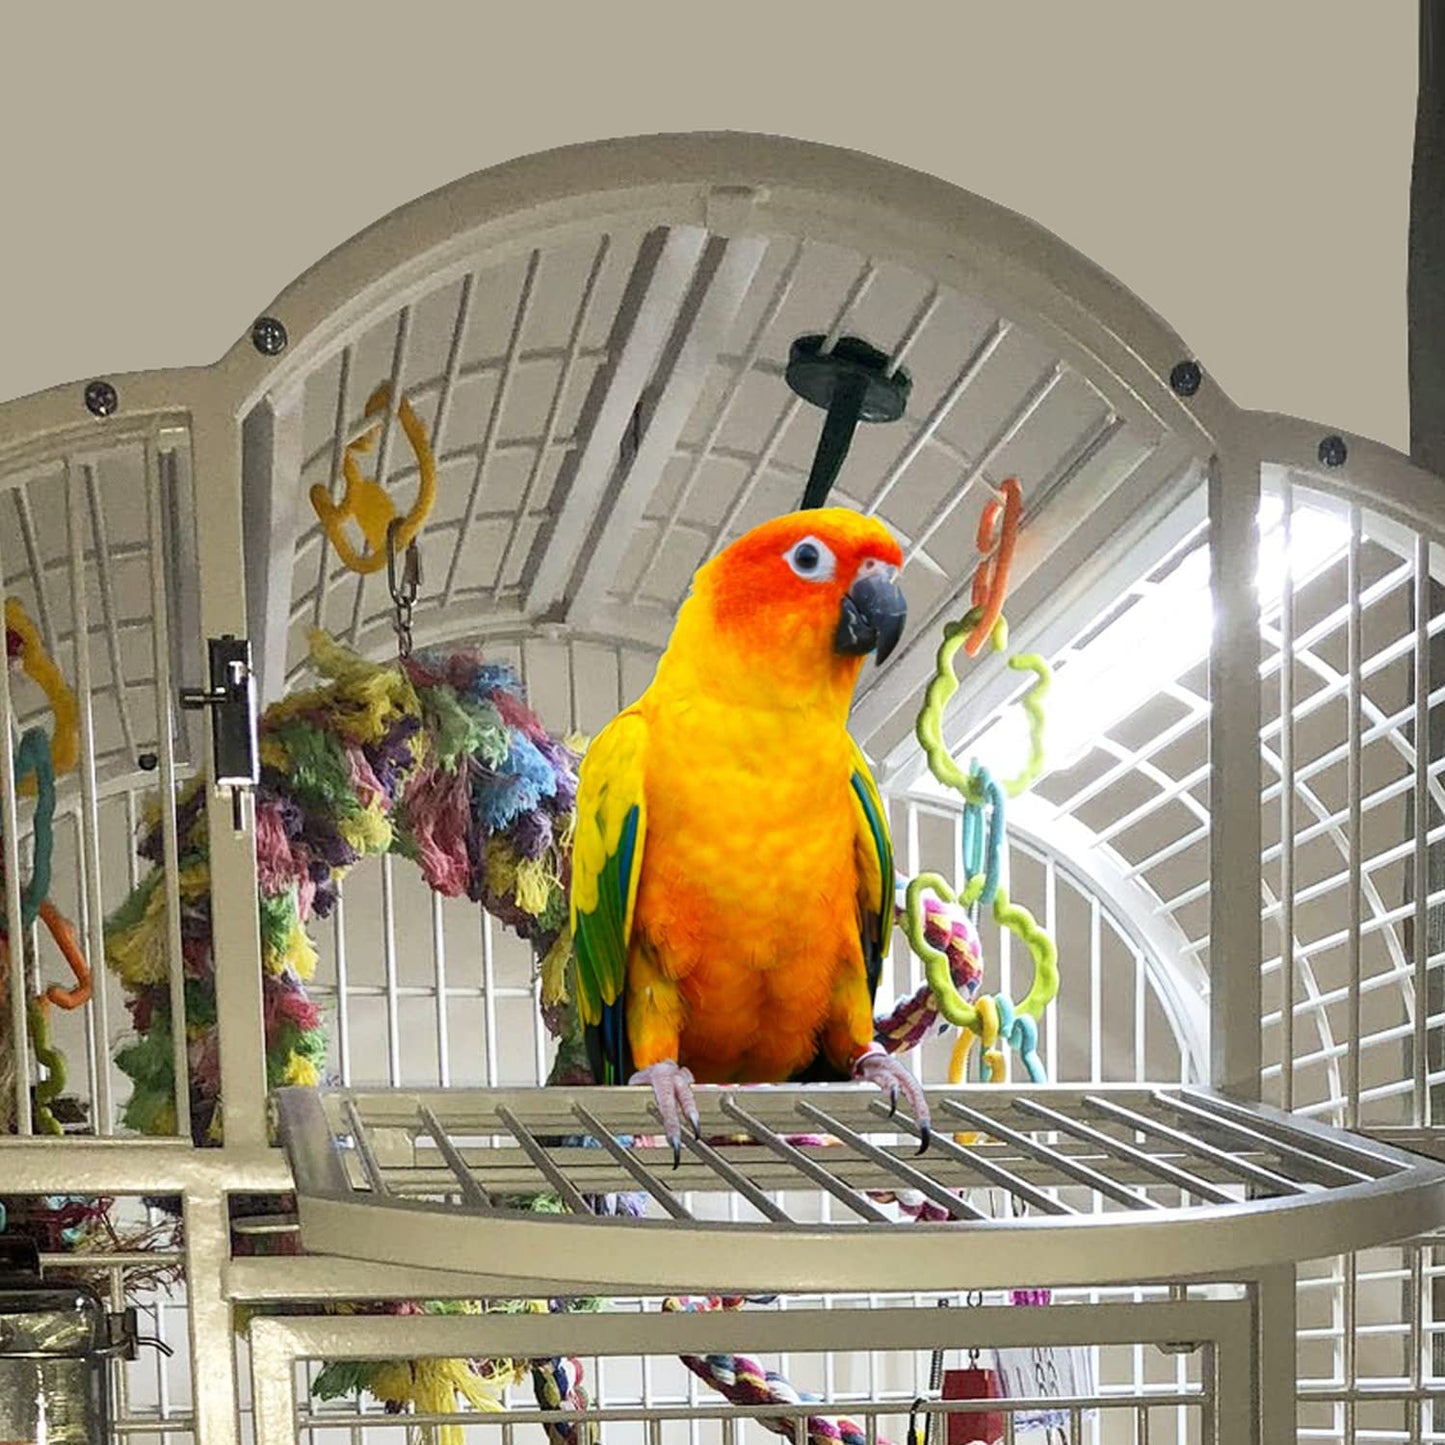 - Bird Cage Light with Chew Guard - Full Spectrum LED Pet Light - Simulates Natural Environment - Safe for Destructive Chewers, Parrots Etc. - No Bulbs to Change (24" Long)